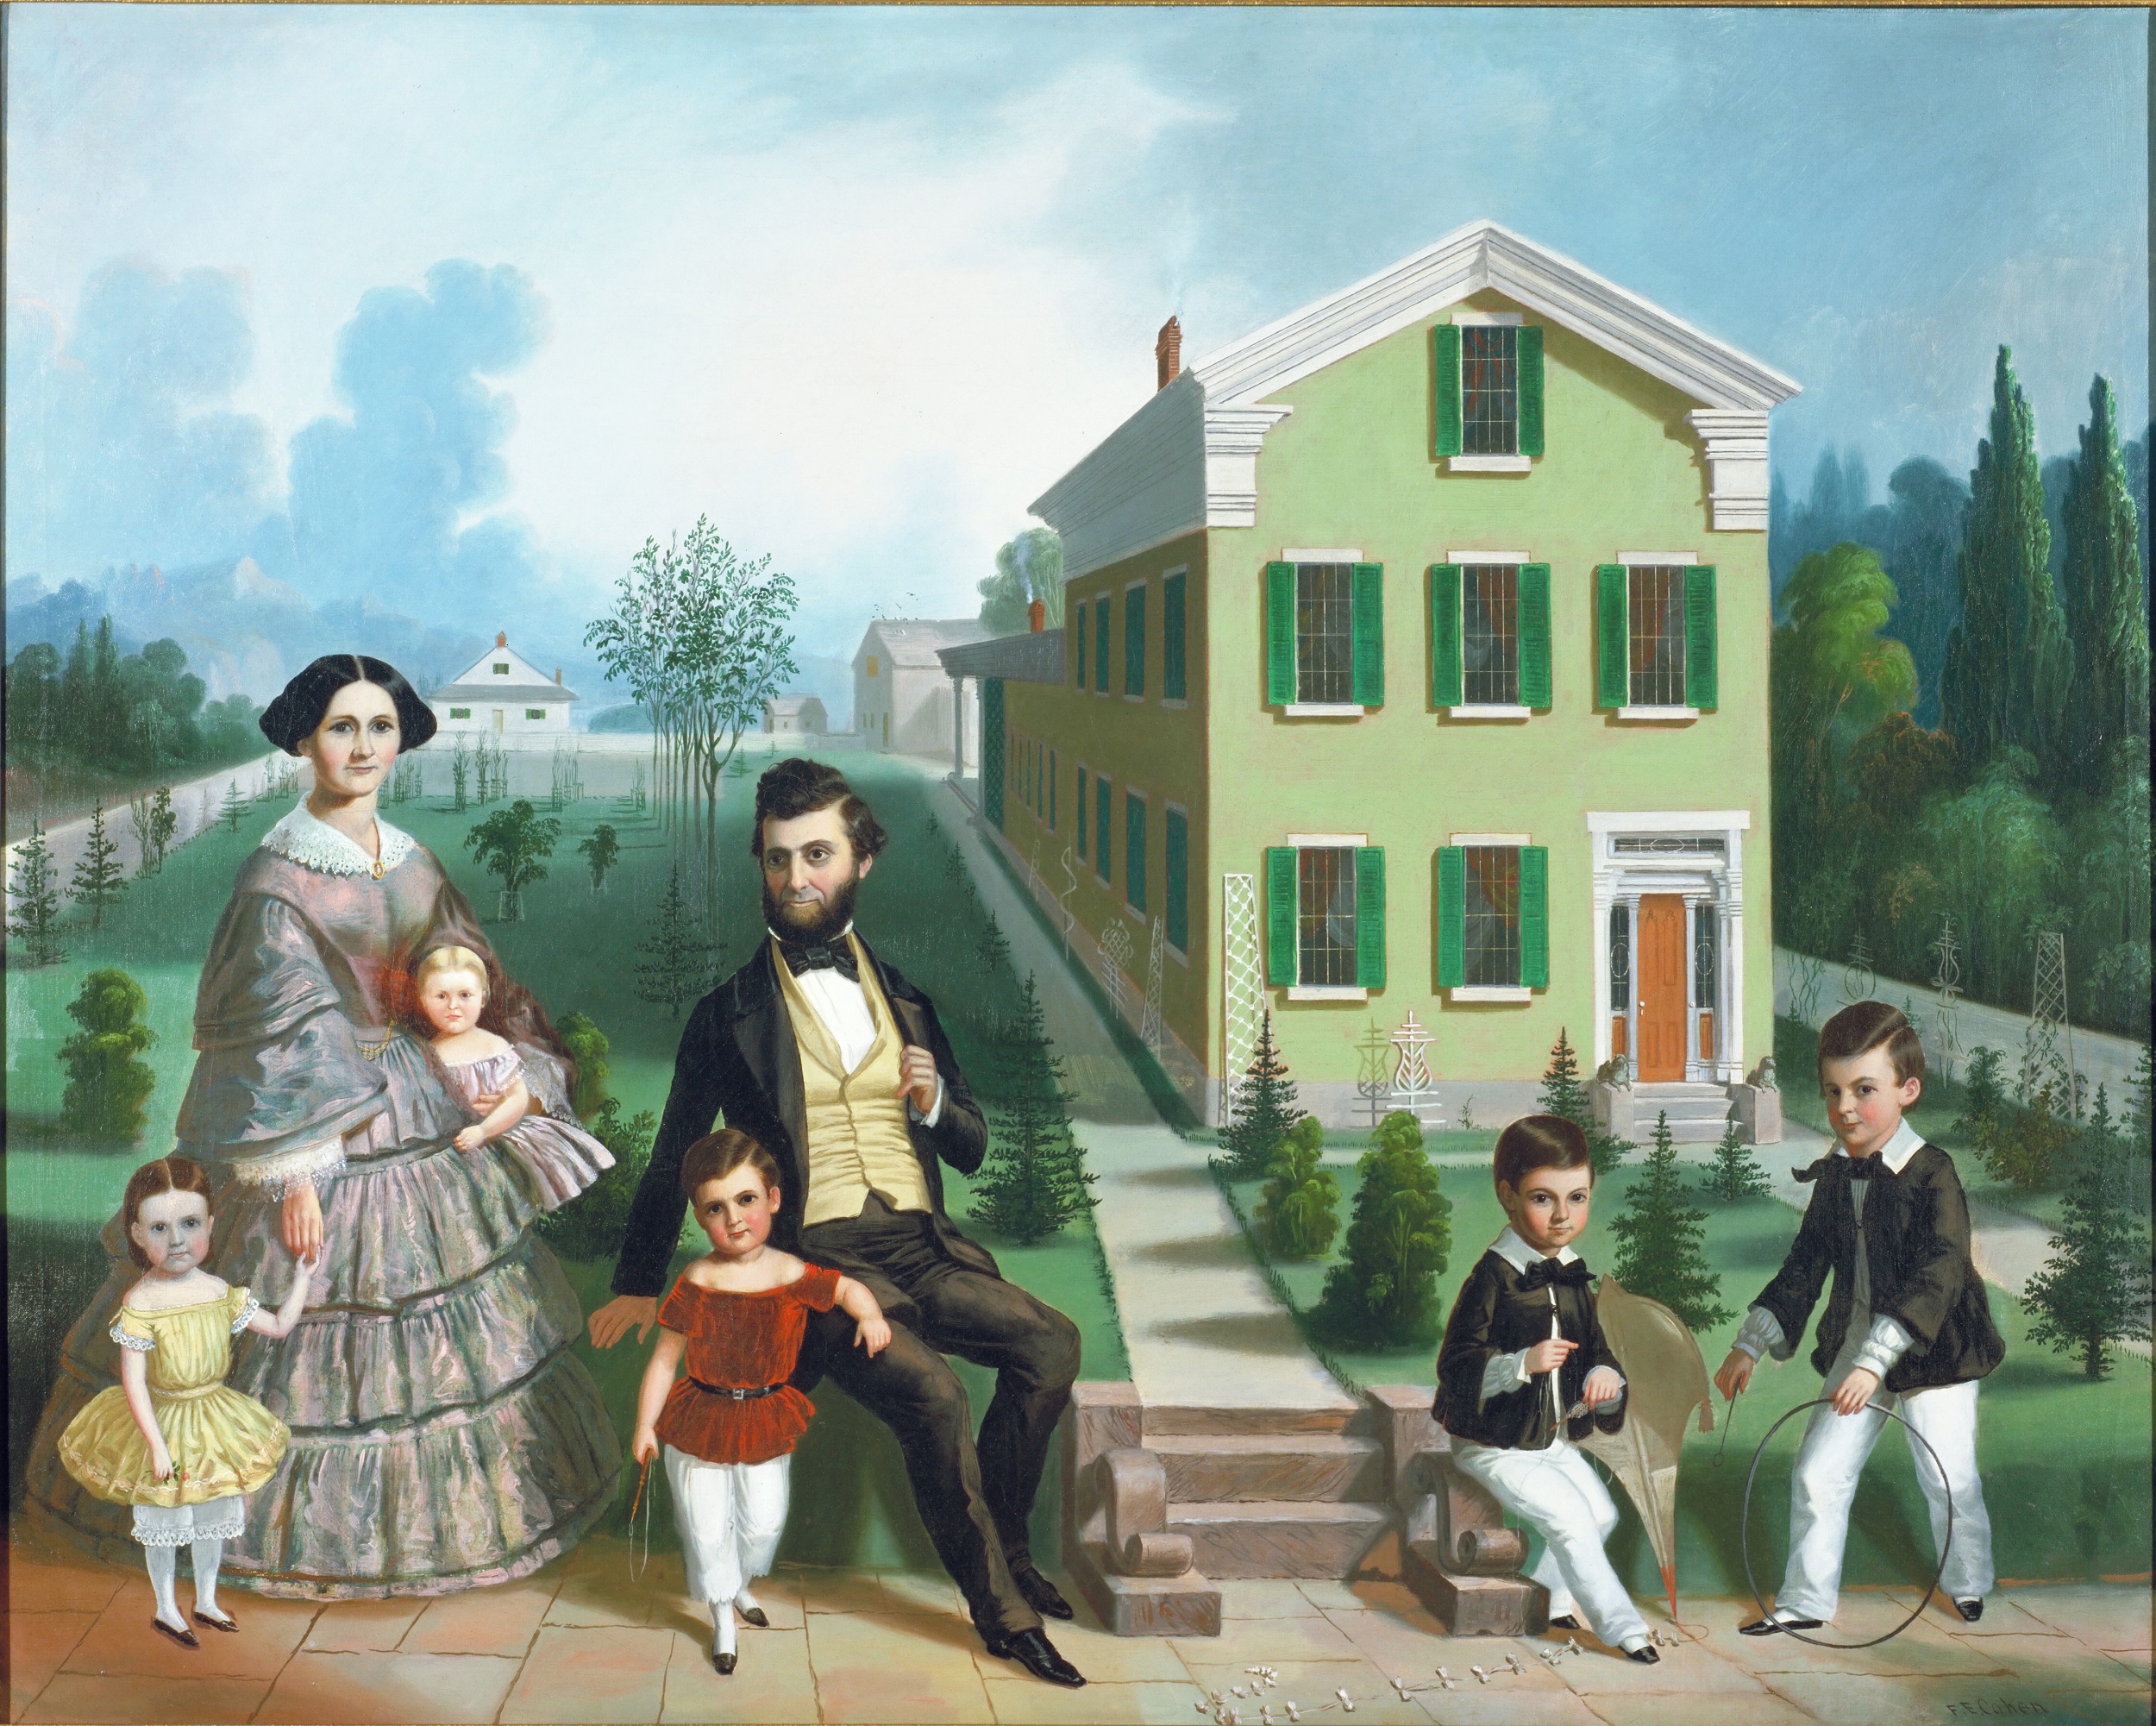 Oil painting of a Euro-American man and woman with five small children in front of a green Greek Revival house in a landscape